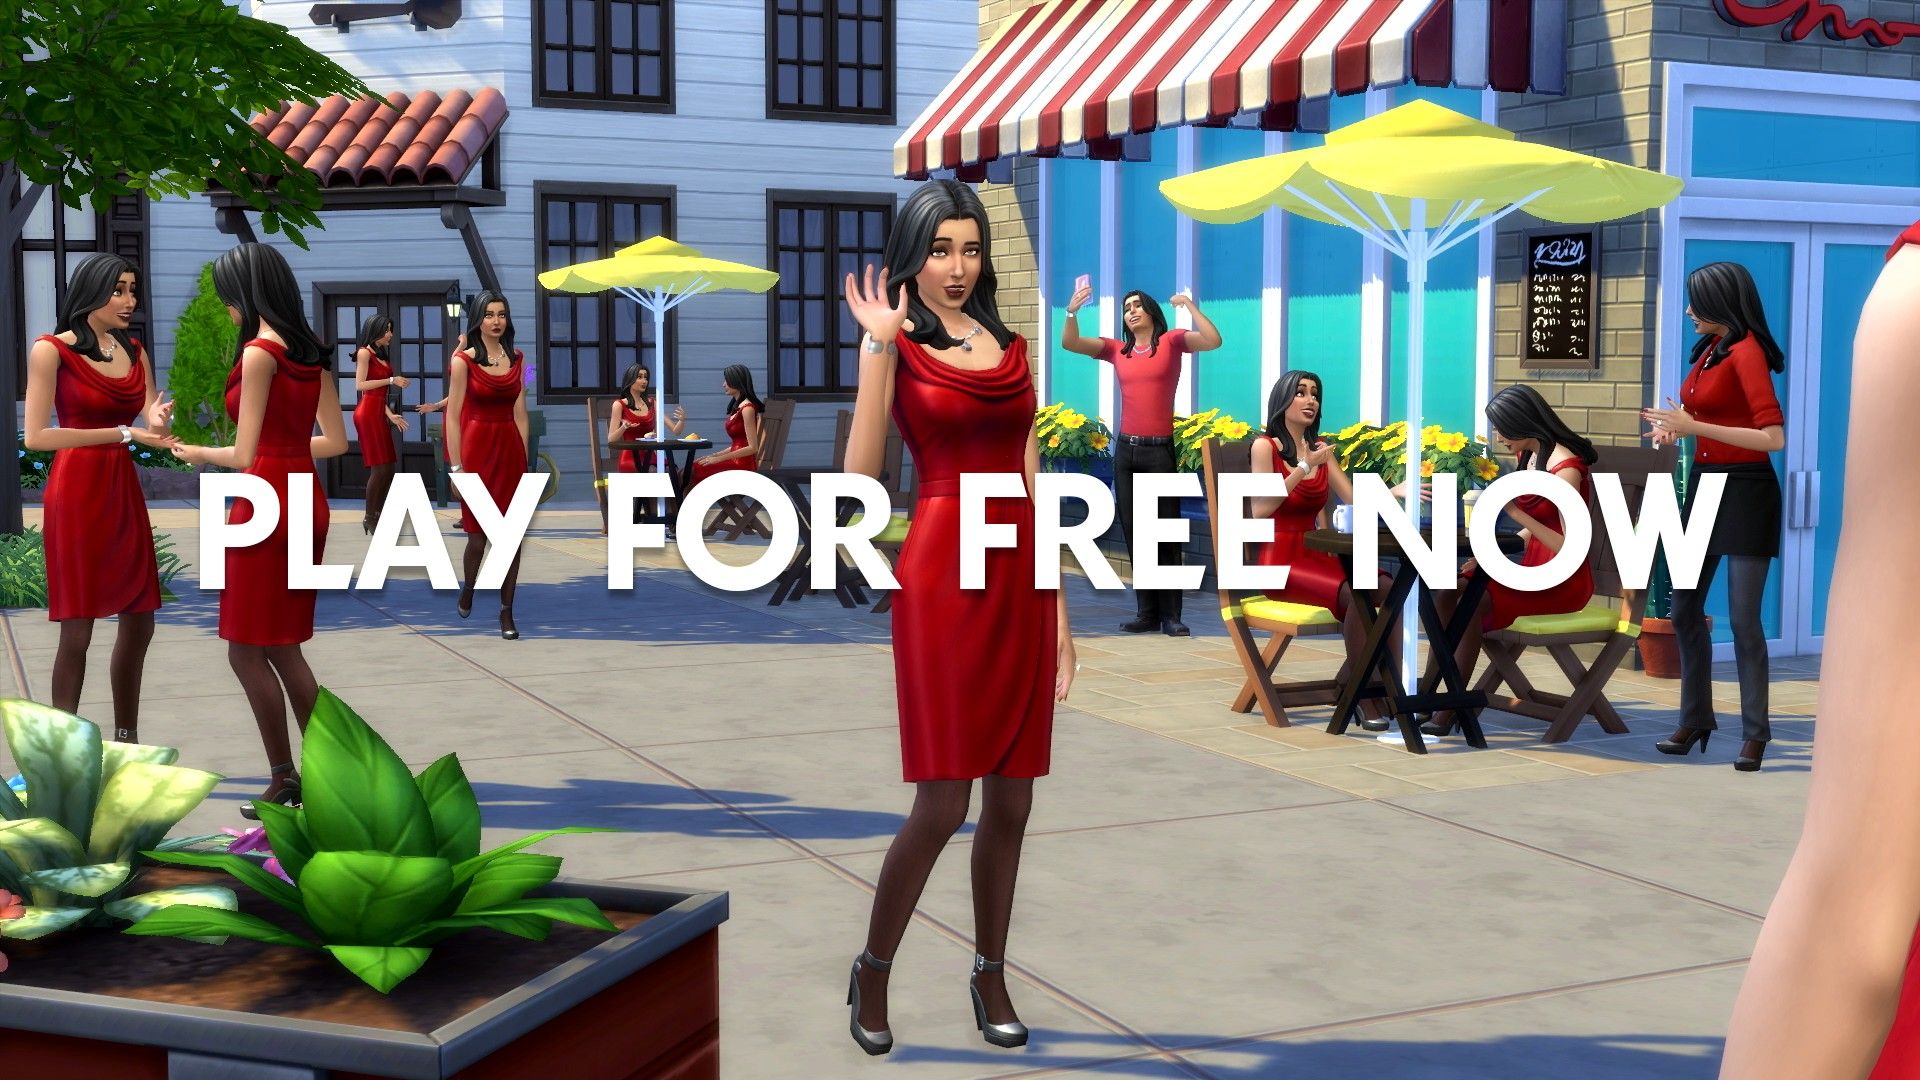 The Sims 4 Bella Goth with text that says "Play for free now."